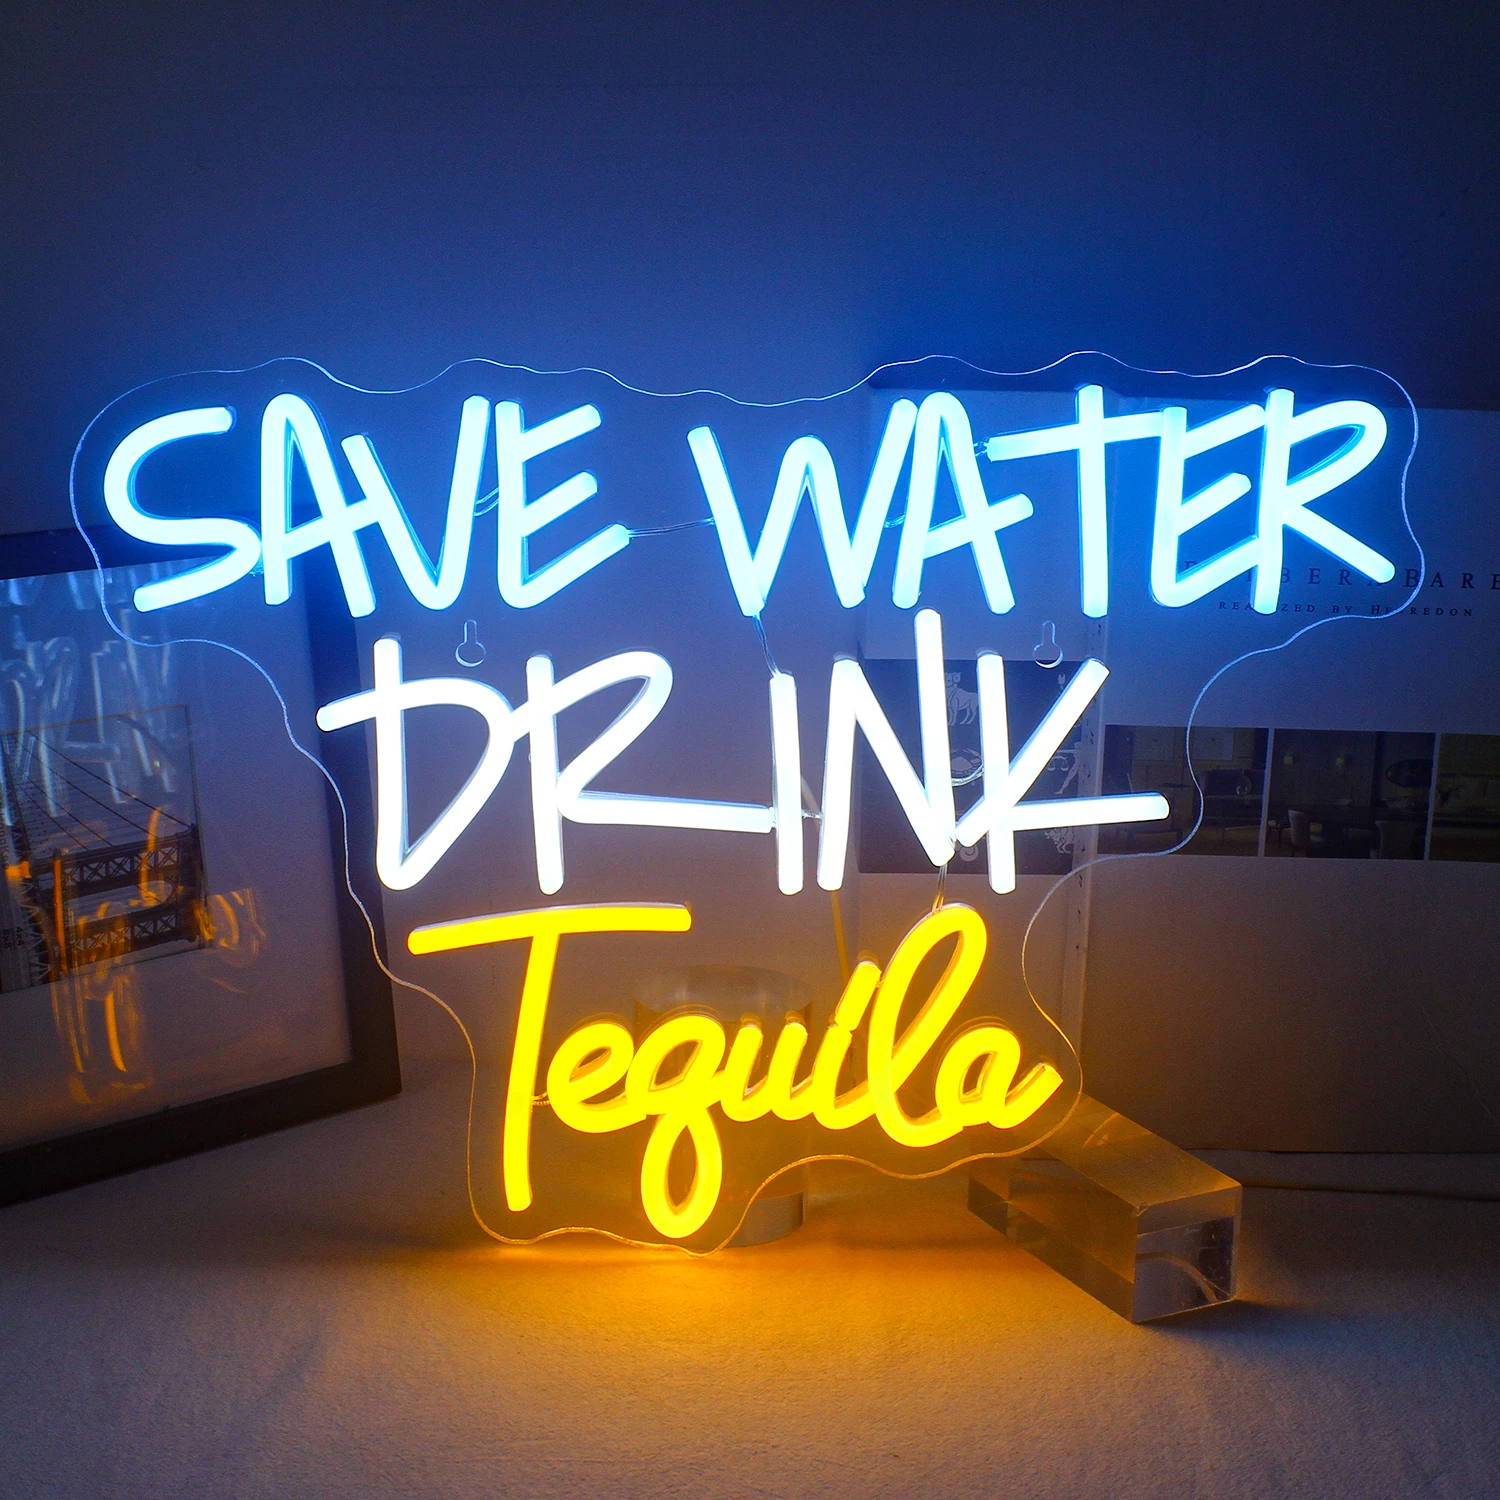 Save Water Drink Tequila Neon Sign Led Neon Lights for Wall Decor USB Light Up Signs Beer Bar Restaurant Cafe Club Party Decor neon sign led cartoon sunglasses wall hanging neon light bar club drink restaurant shop party aesthetic room decor led light